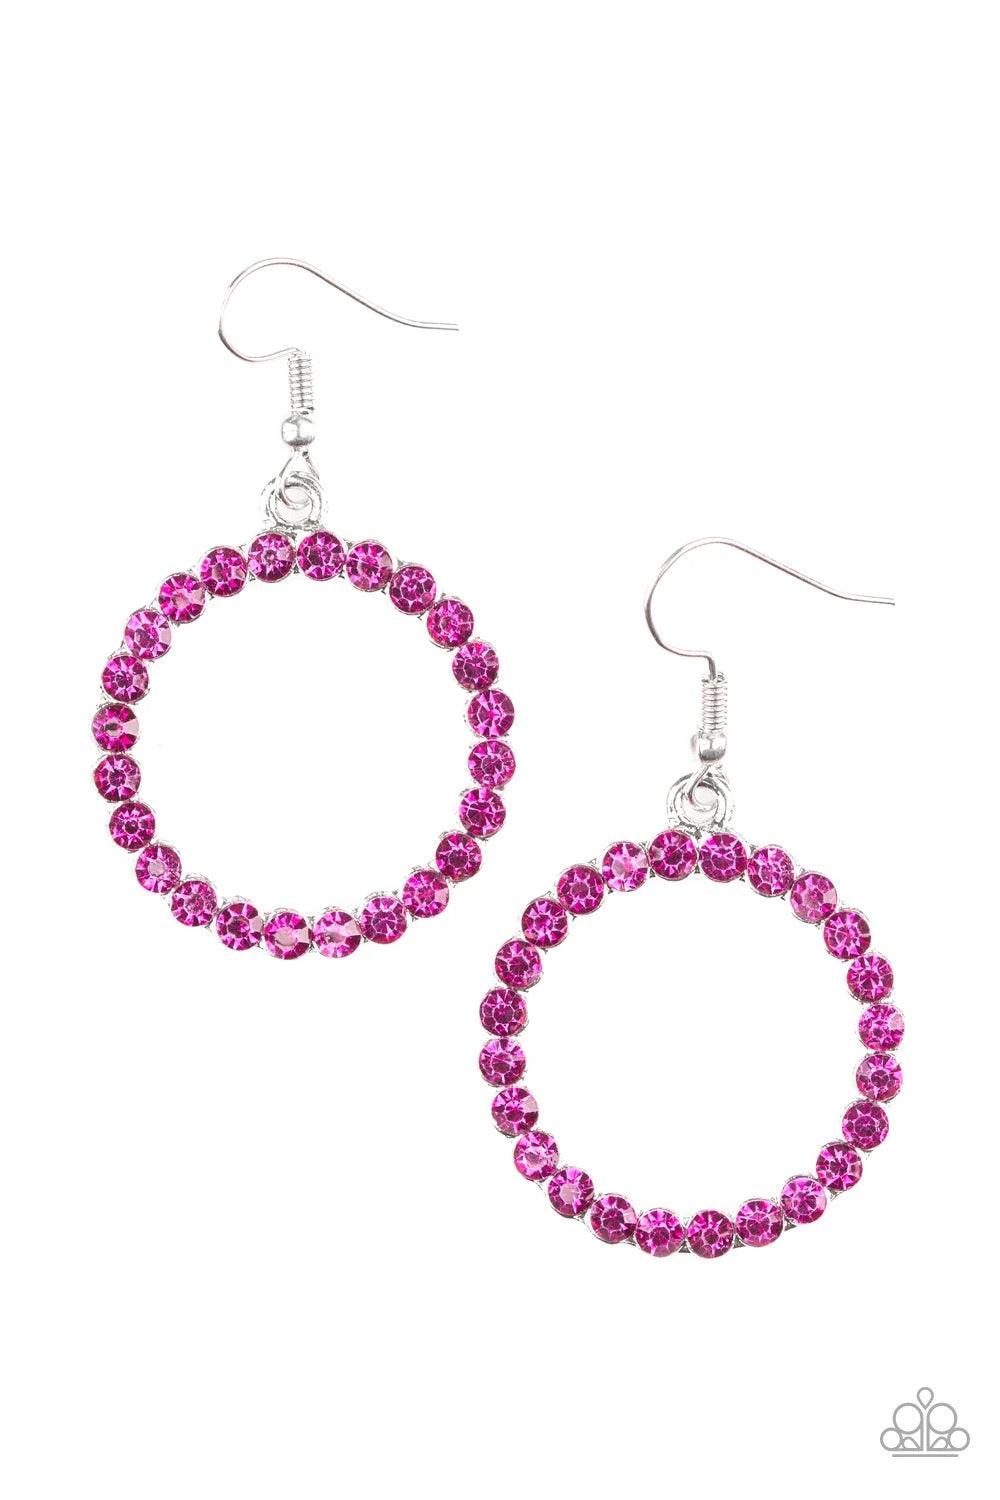 Paparazzi Accessories Bubblicious - Pink Glittery pink rhinestones are encrusted along a circular silver frame, creating a bubbly frame. Earring attaches to a standard fishhook fitting. Sold as one pair of earrings. Jewelry